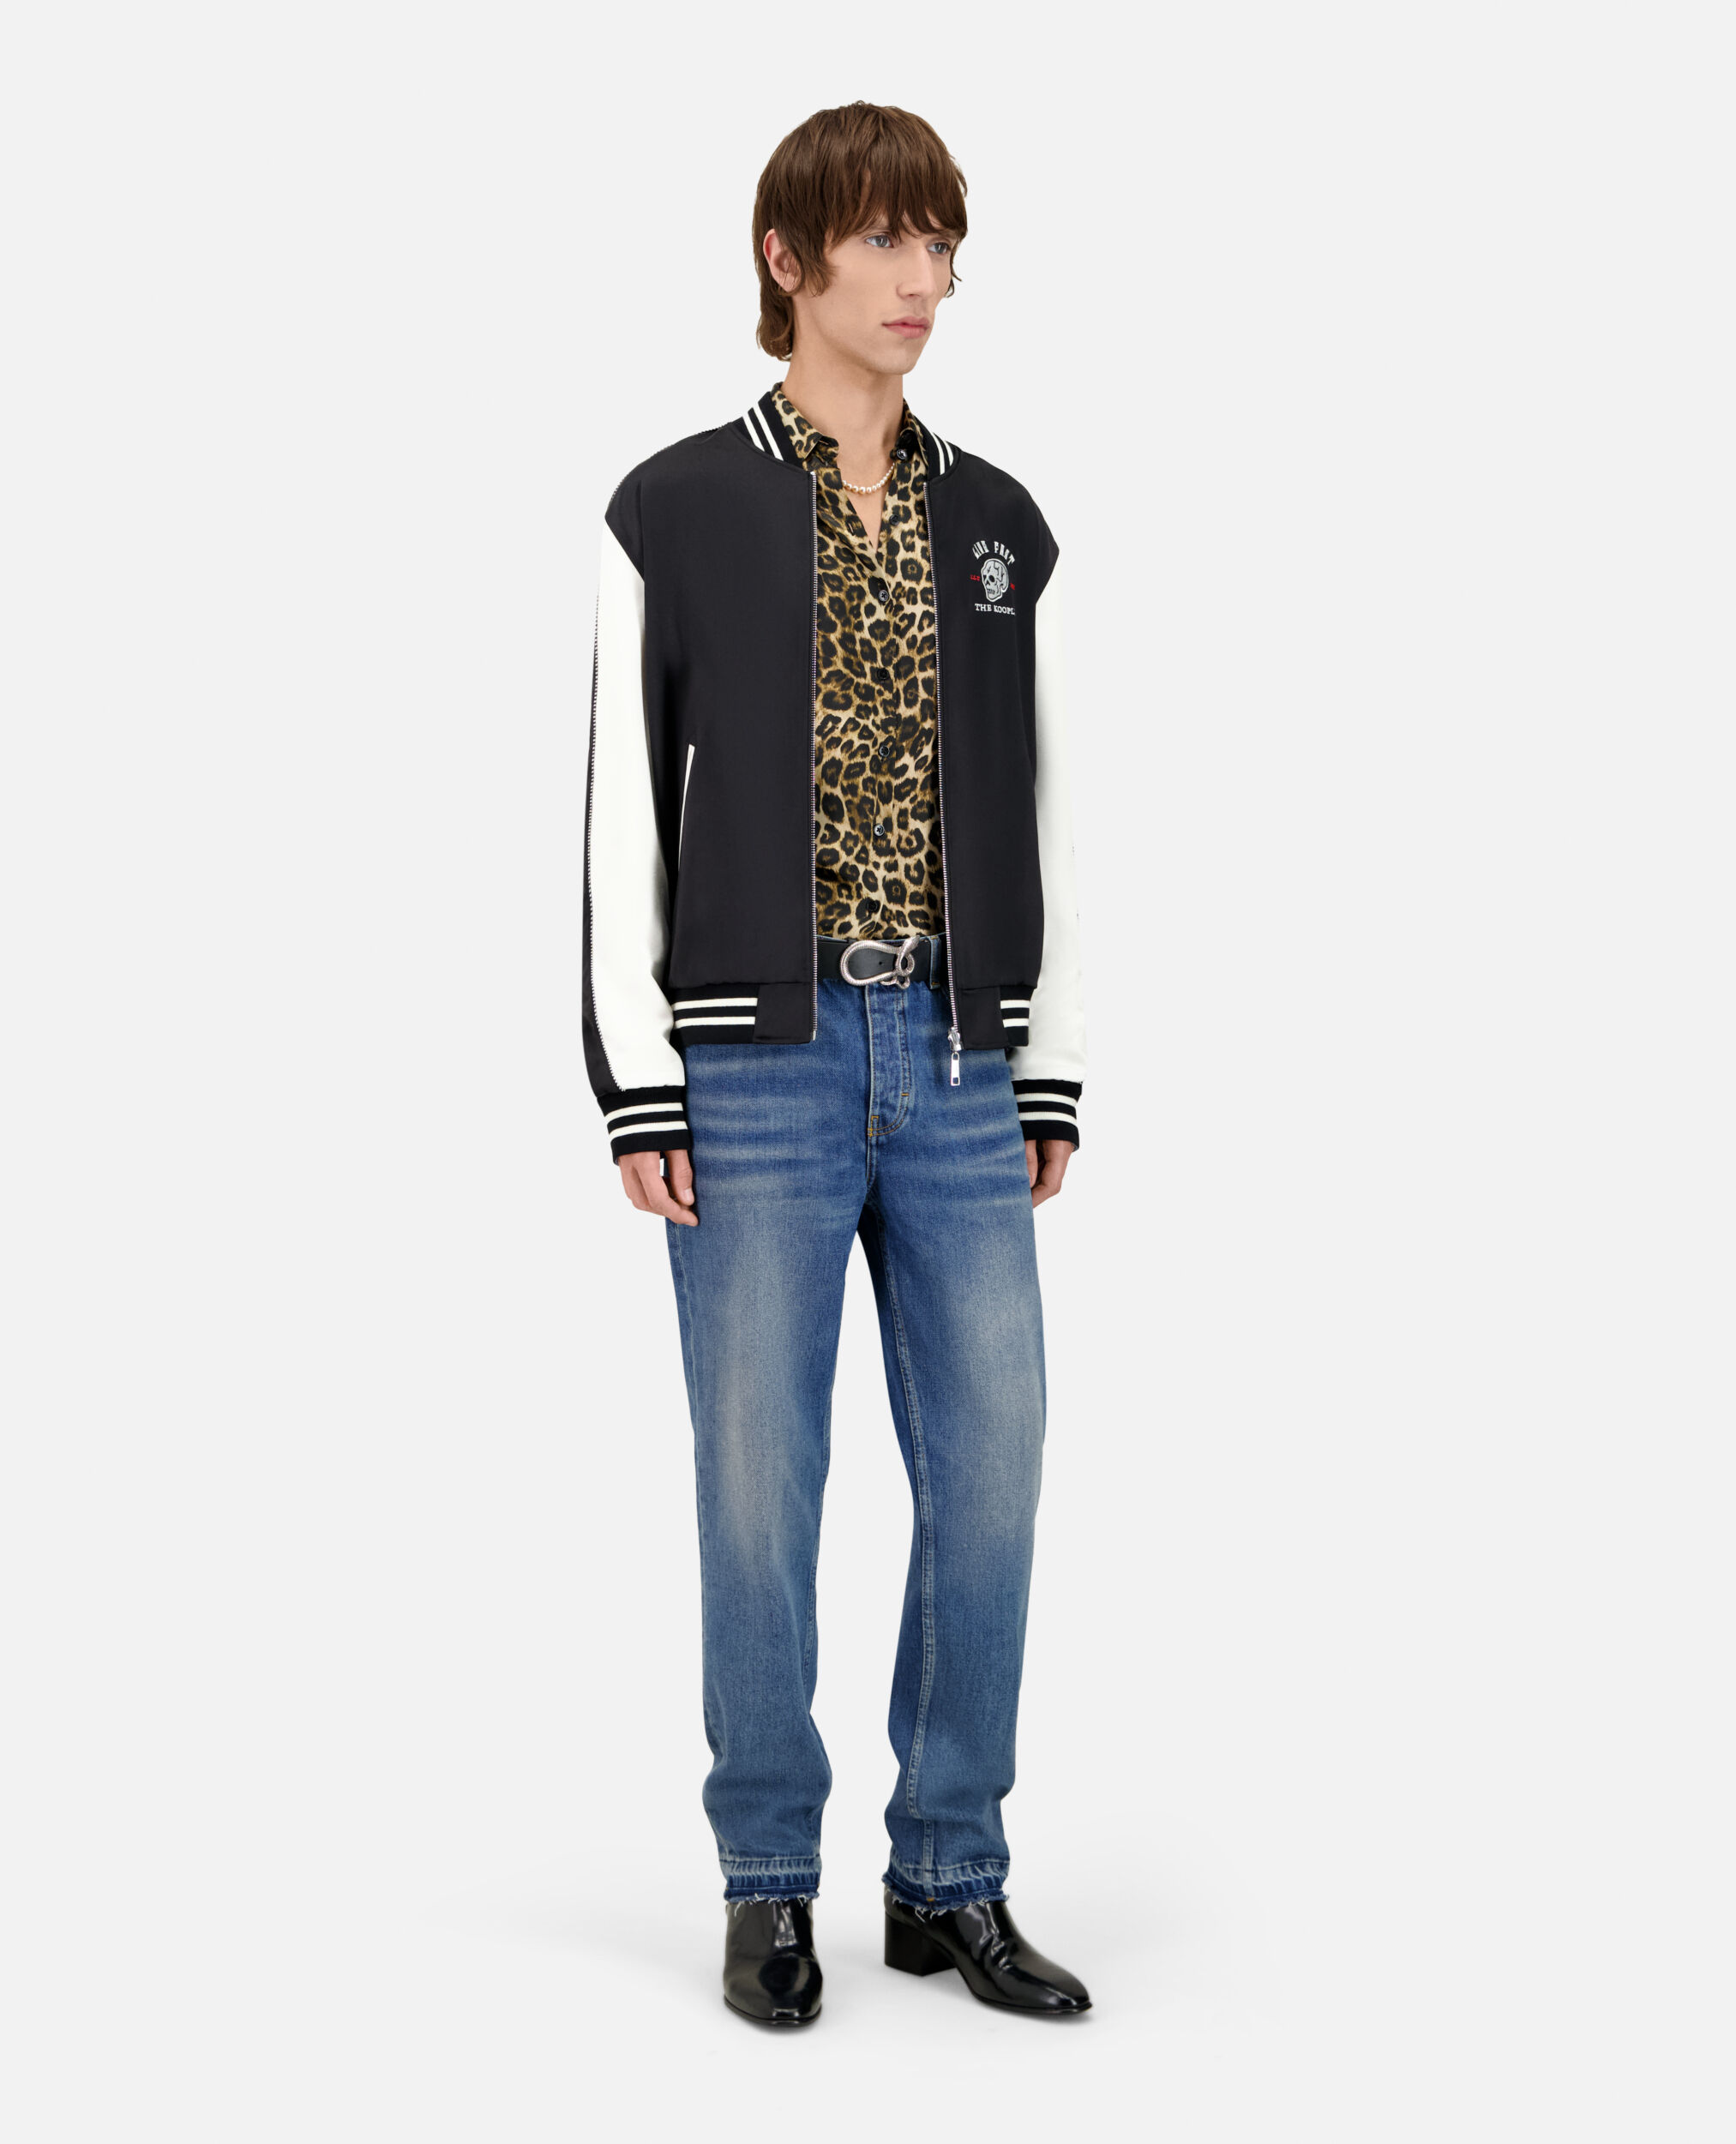 Satin black reversible jacket with Tiger embroidery, BLACK, hi-res image number null